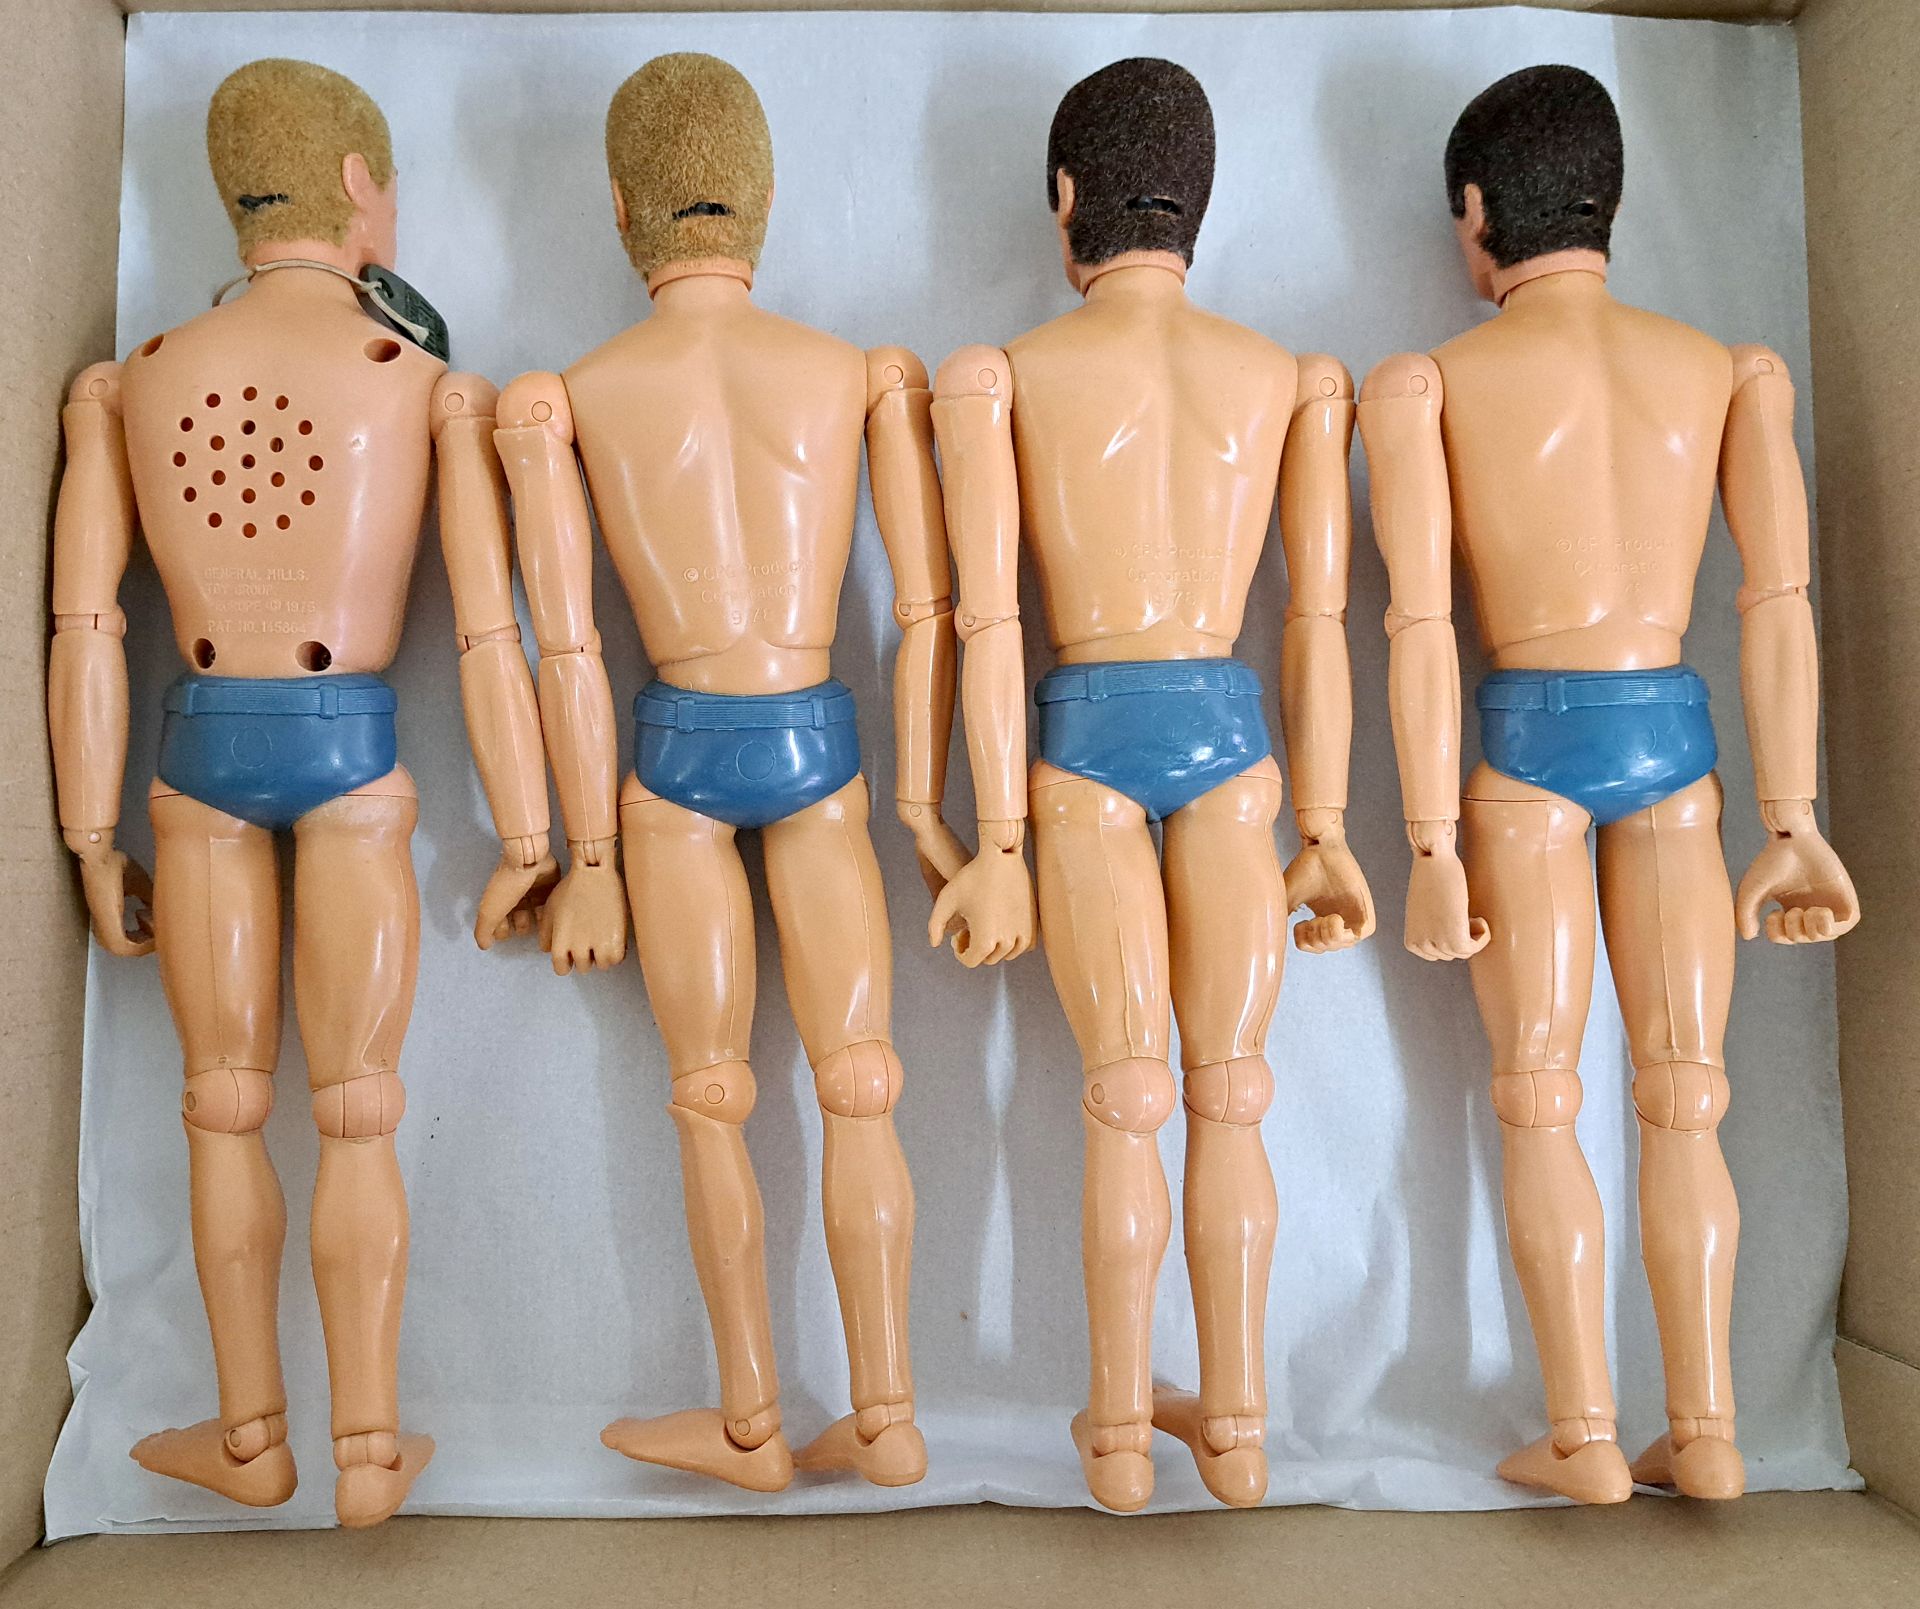 Palitoy Action Man vintage dynamic eagle-eyed figures/loose/undressed, a group which appear to be... - Image 2 of 2